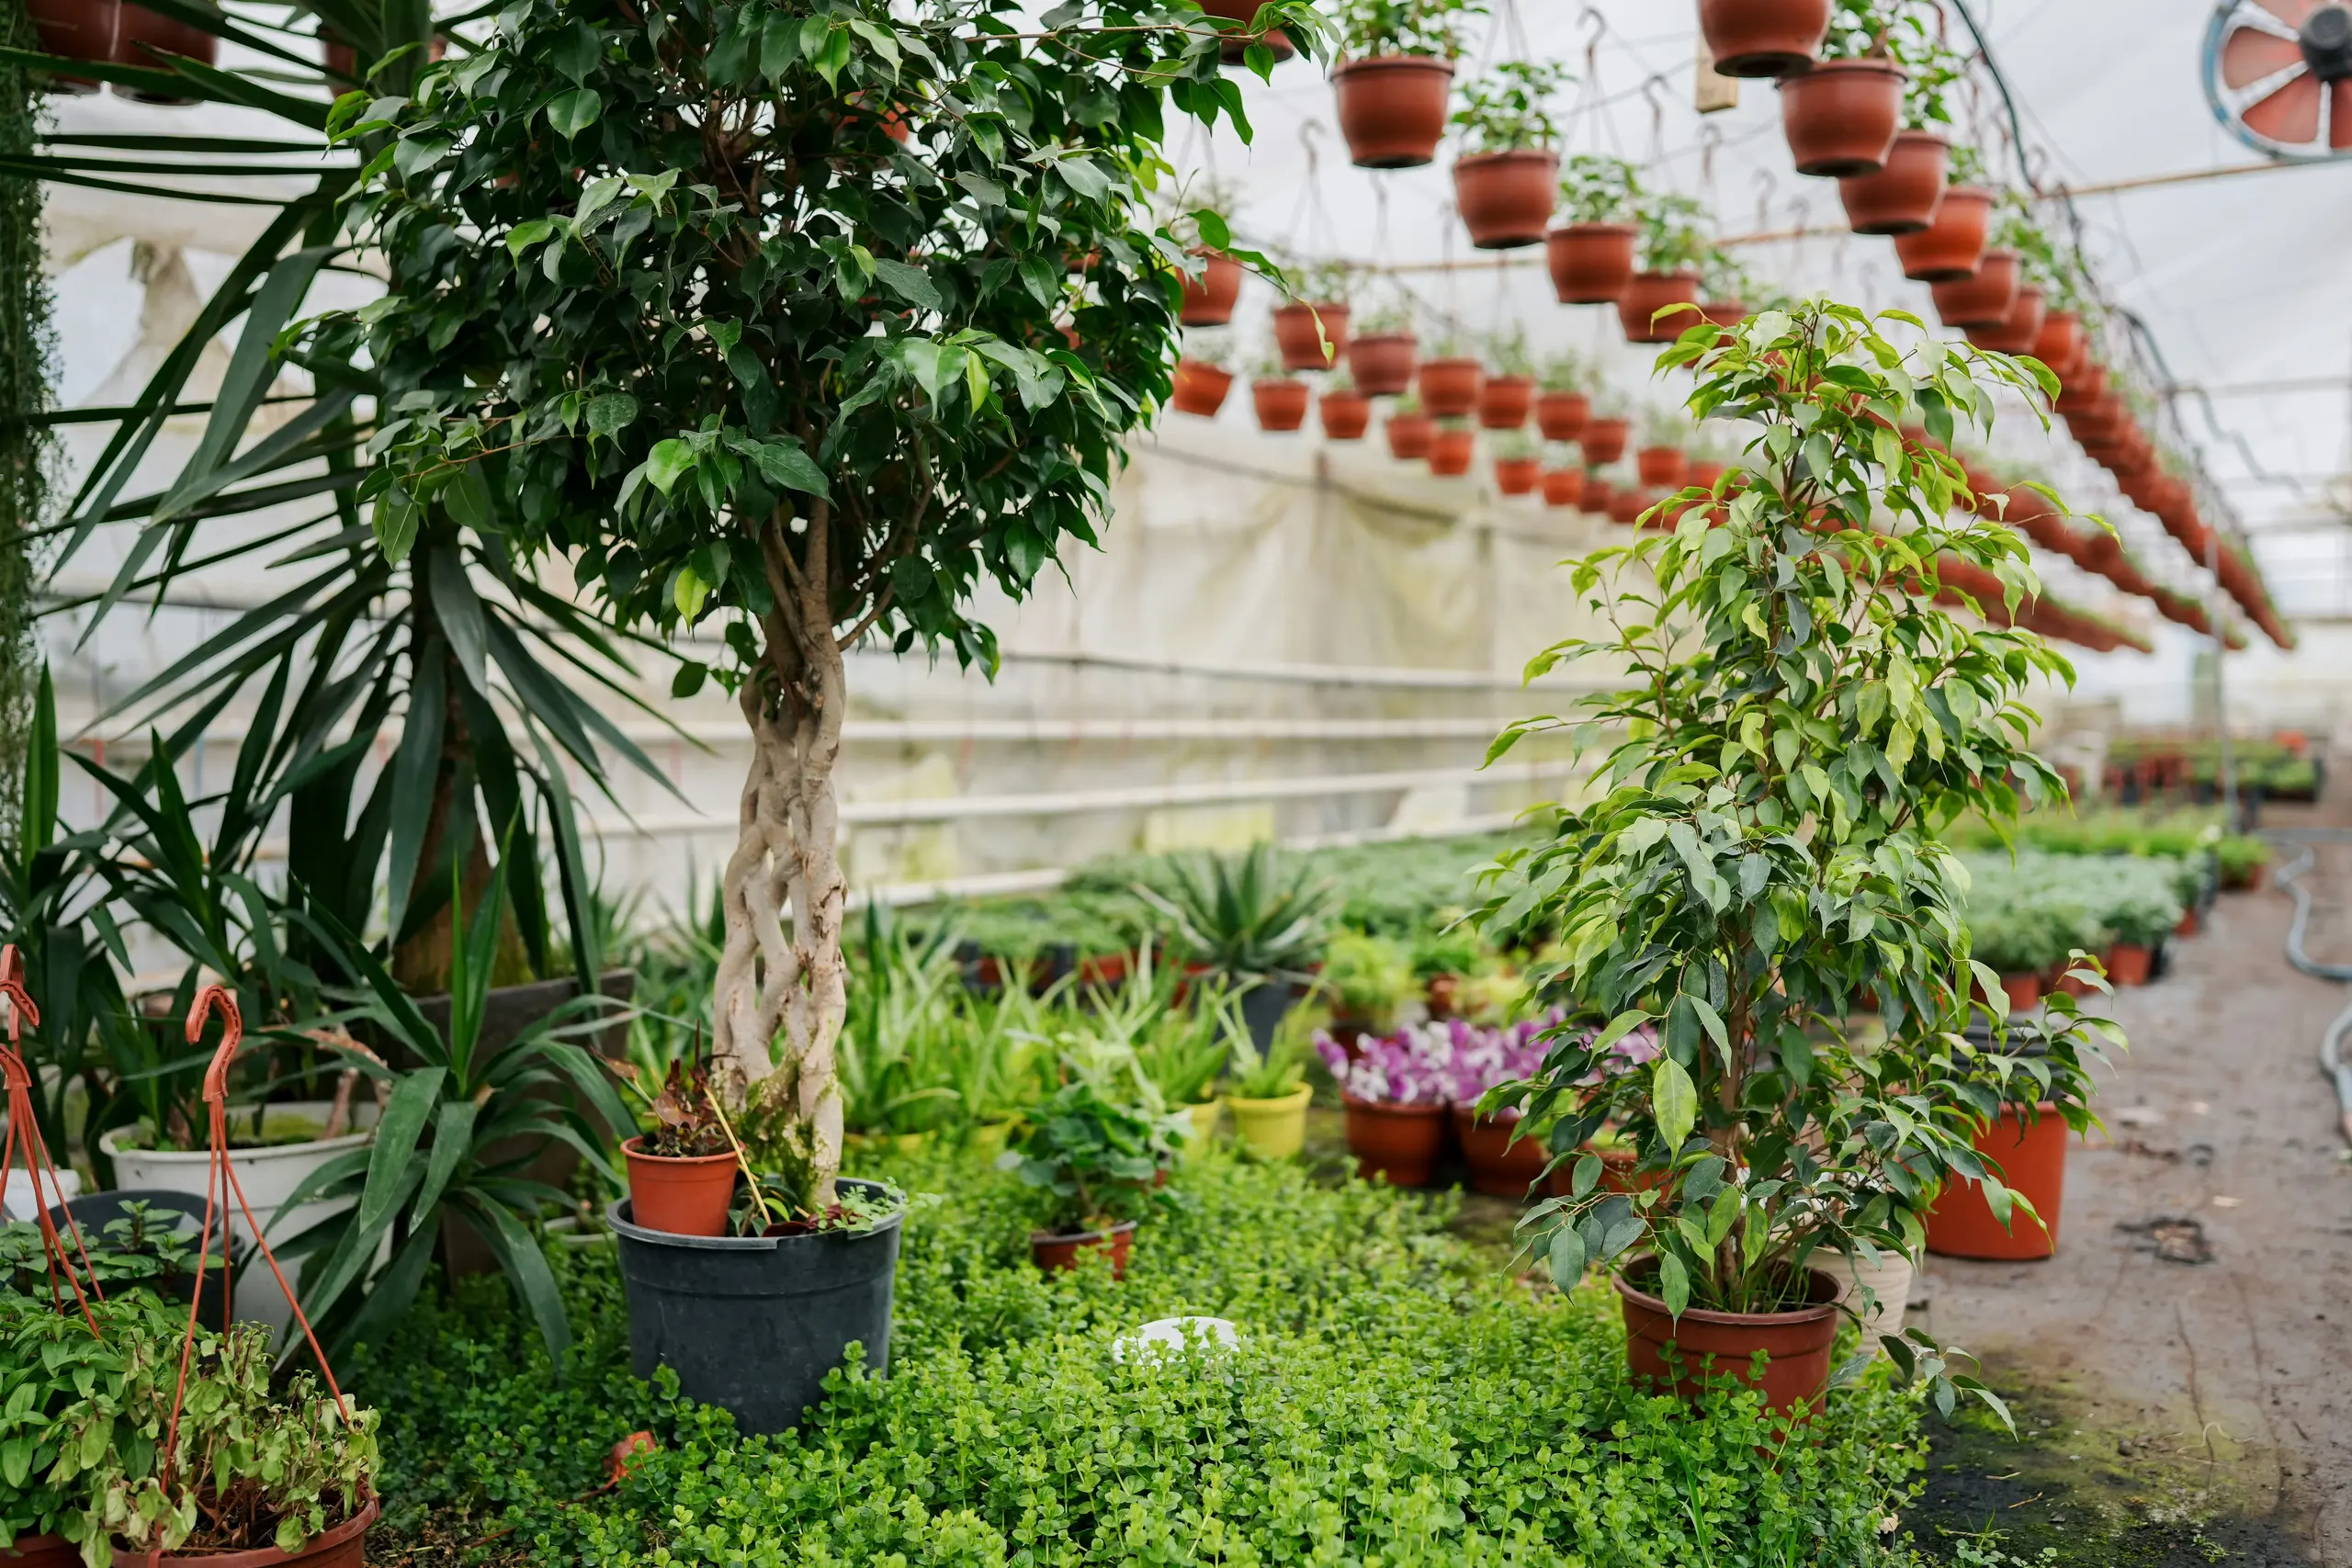 A tree nursery filled with potted trees and hanging potted plants